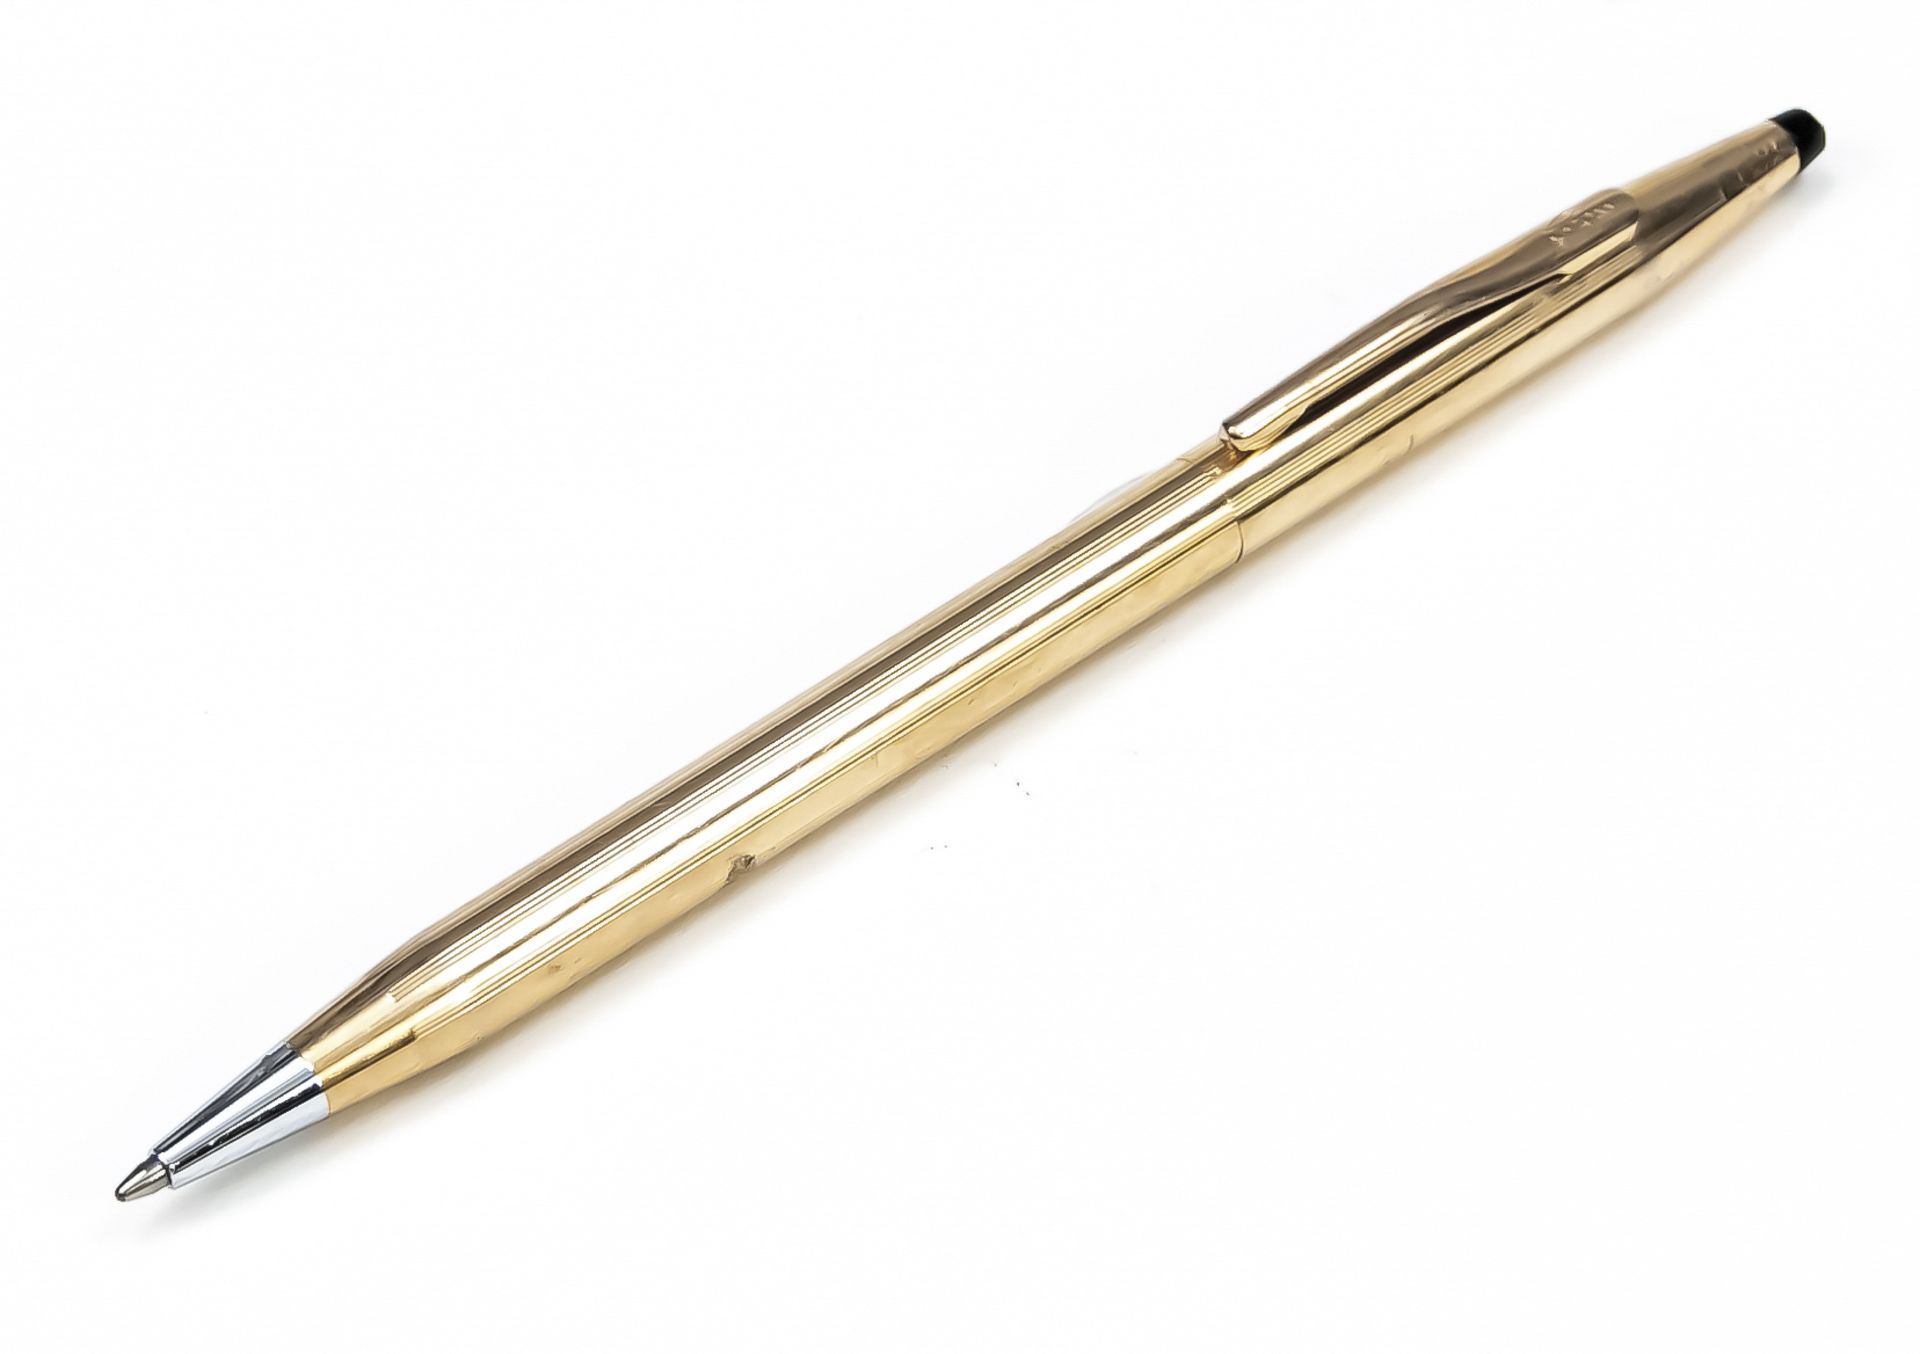 Cross ballpoint pen, Made in Ireland, 2nd half of 20th c., 14 ct hard gold plated case with stripe